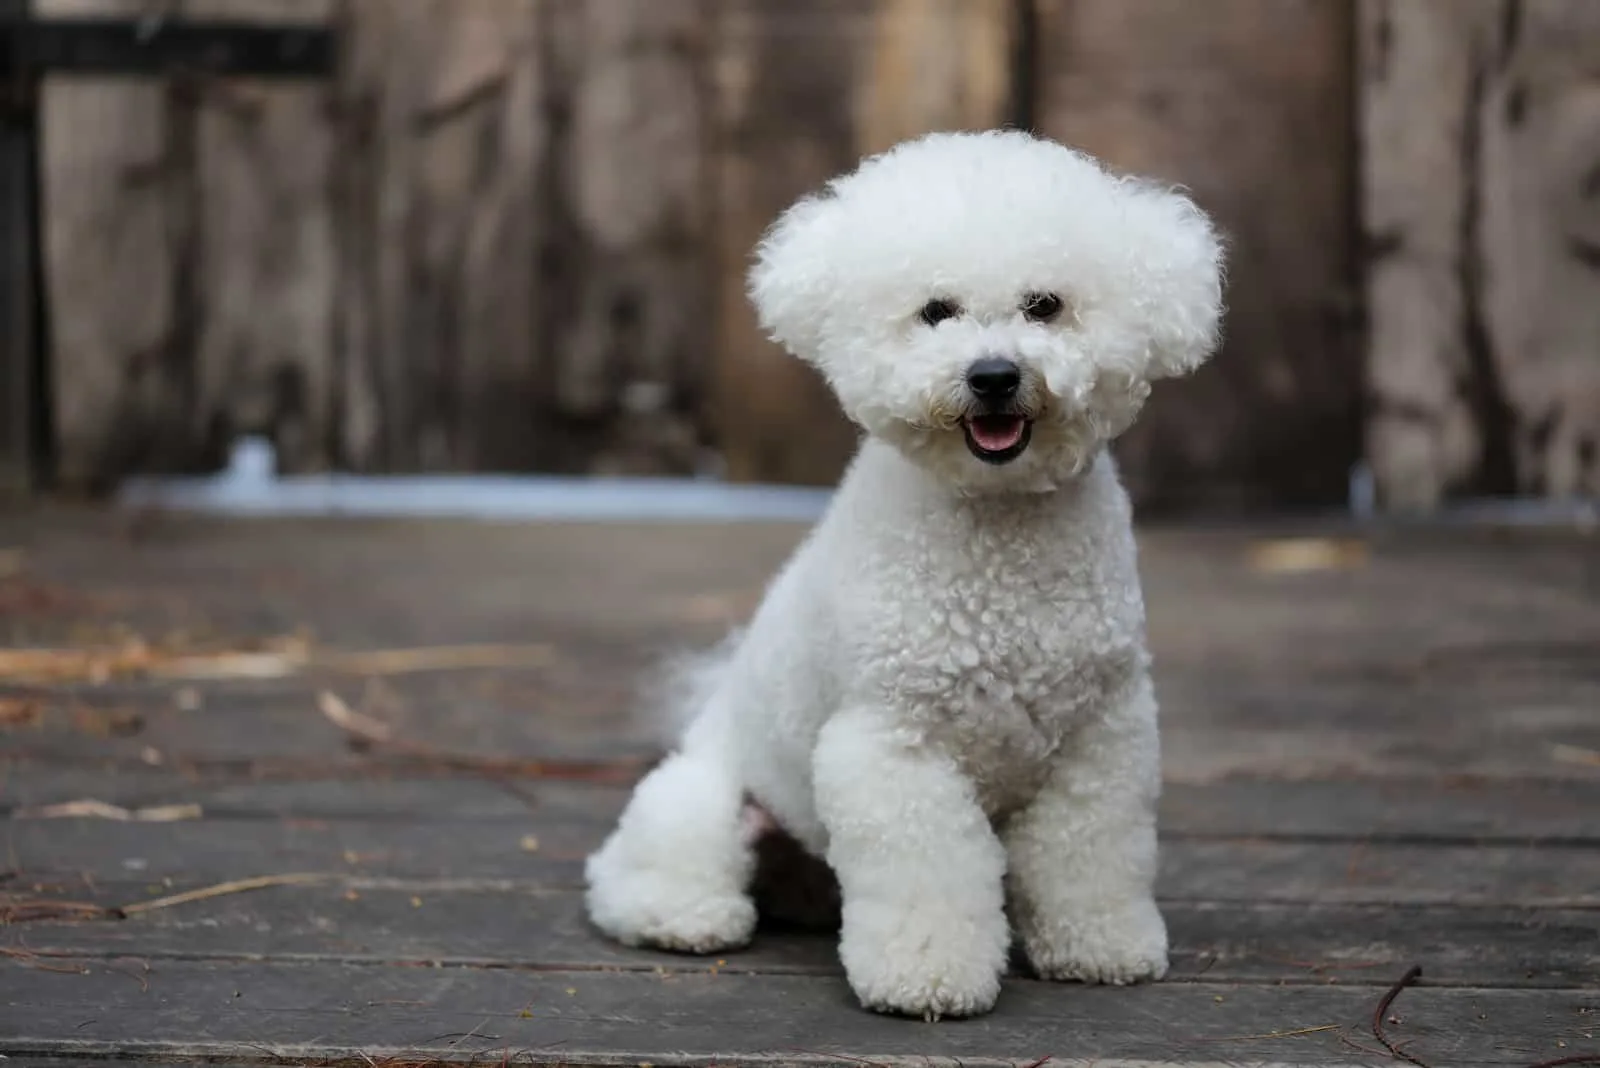 Bichon Frise dog with a white fluffy coat